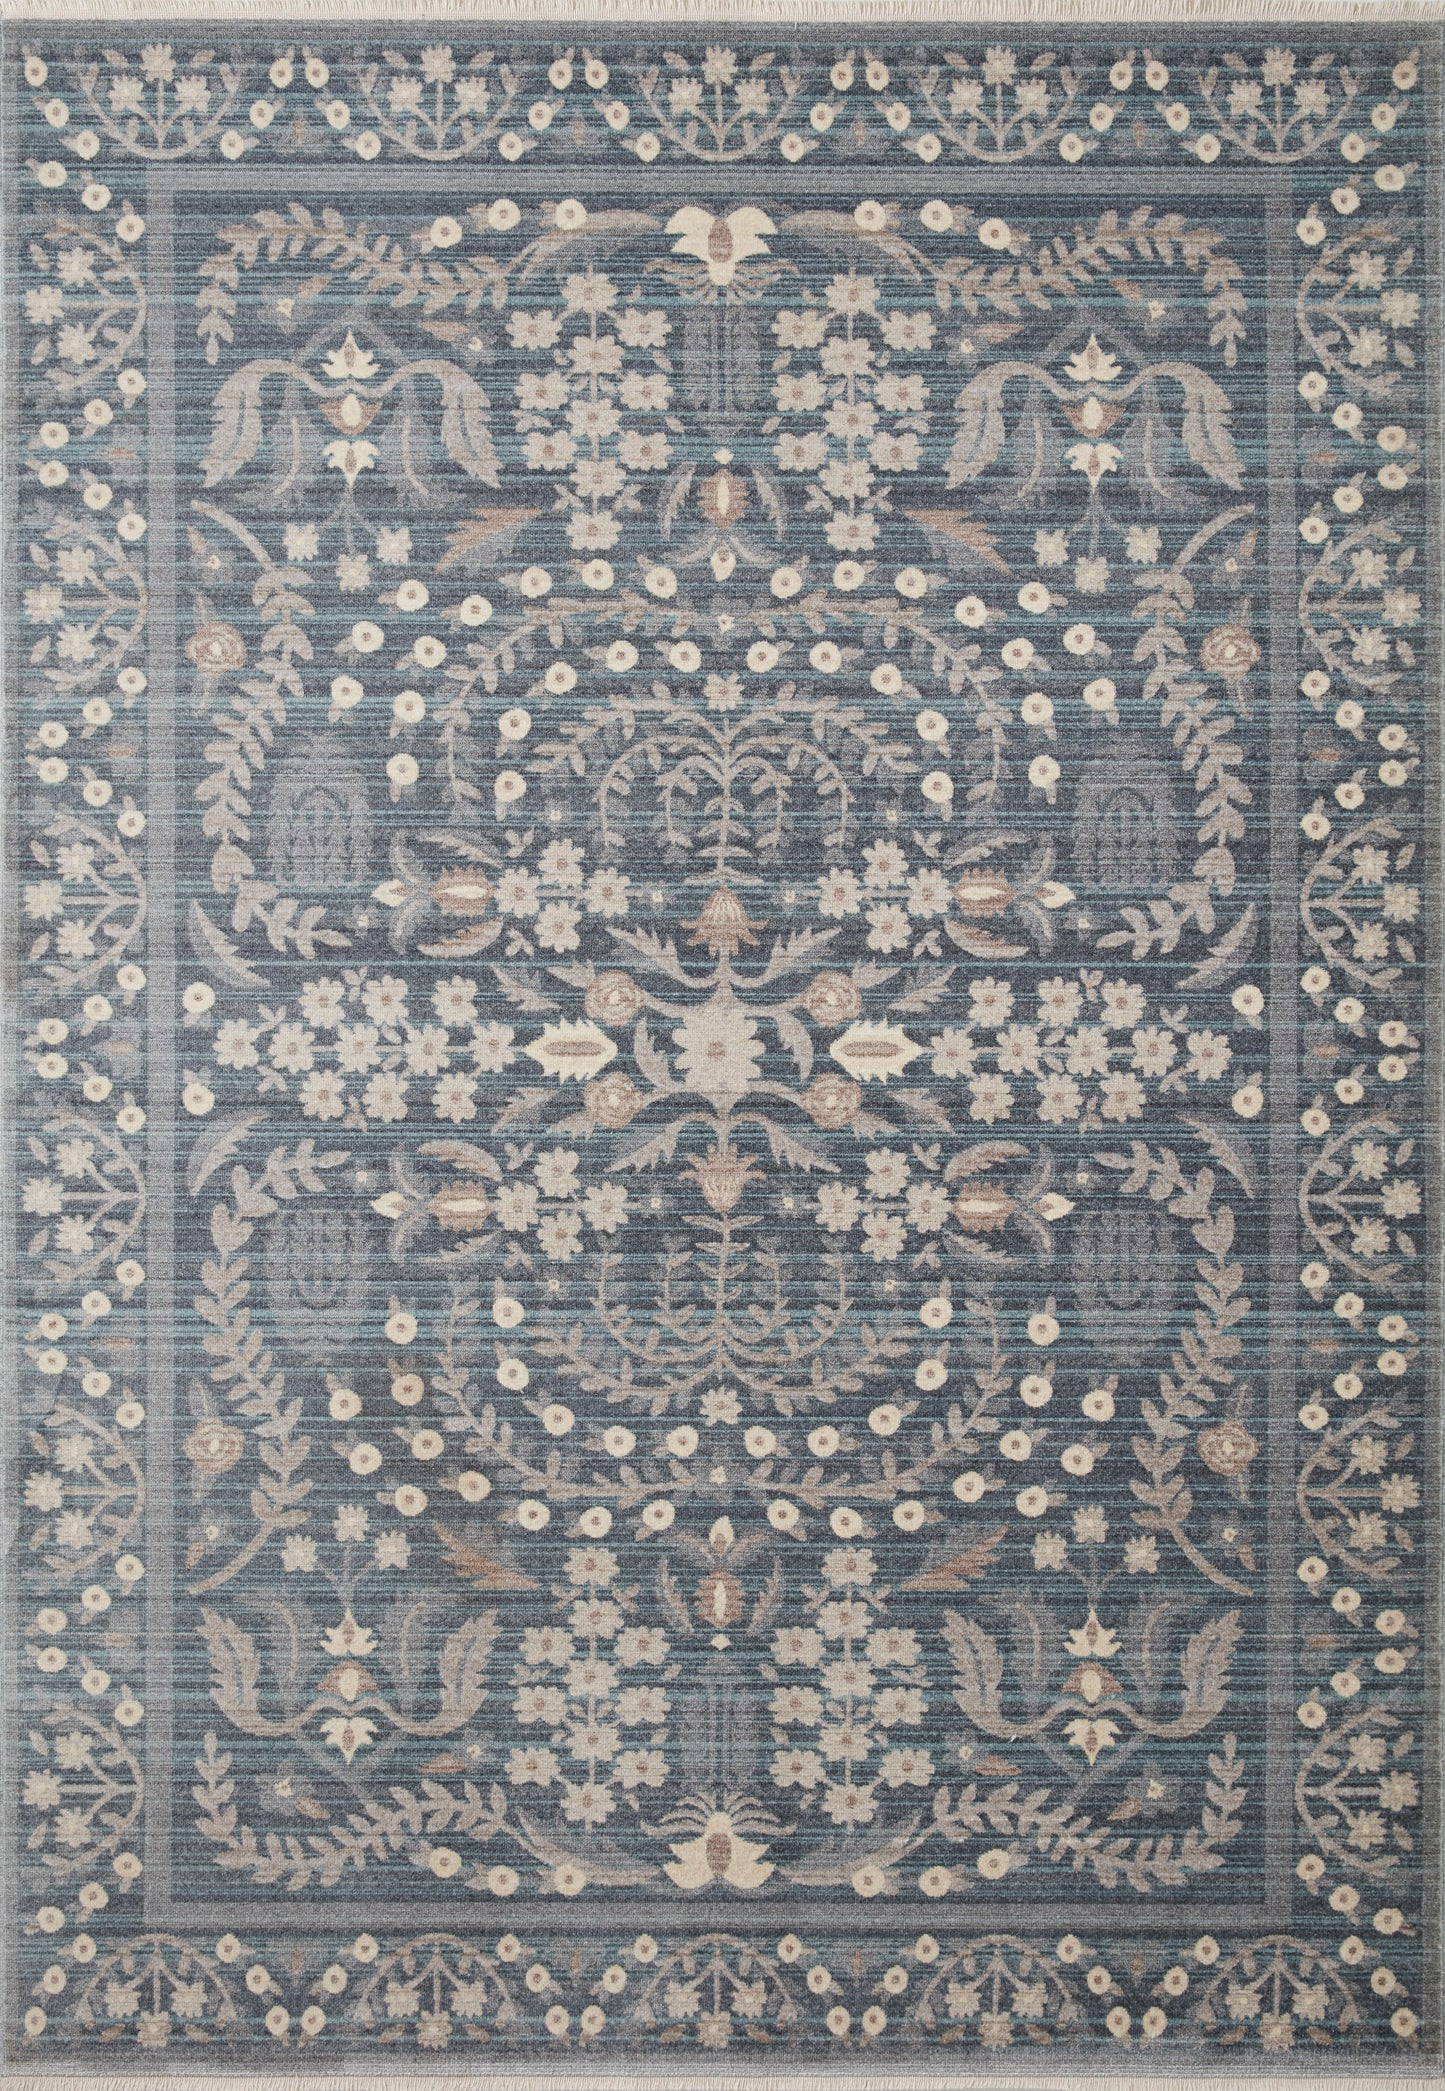 A picture of Loloi's Holland rug, in style HLD-04, color Blue